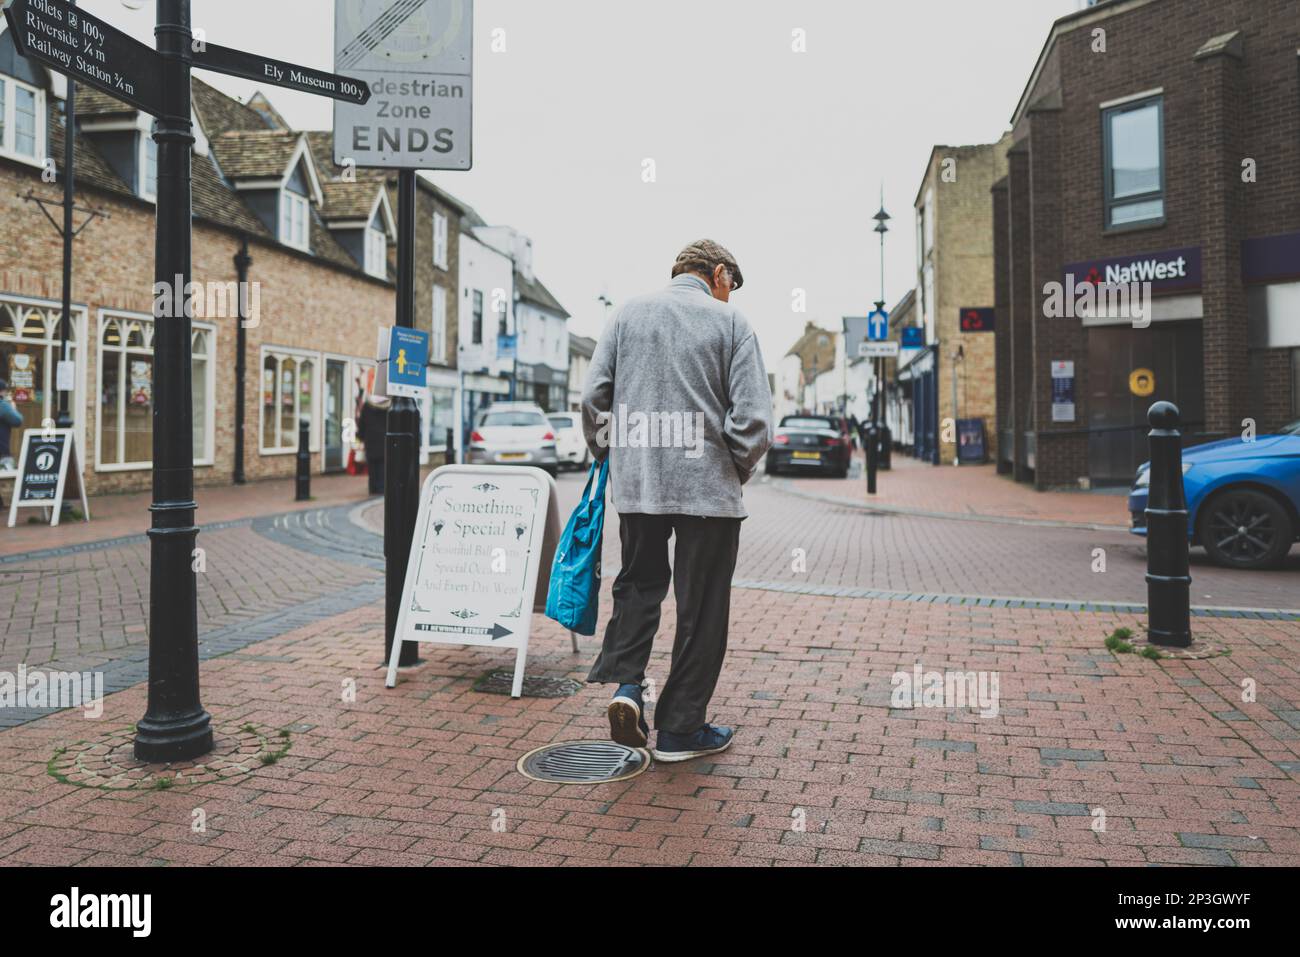 High contrast view of a senior adult man seen walking in a high street setting on a windy day. Stock Photo